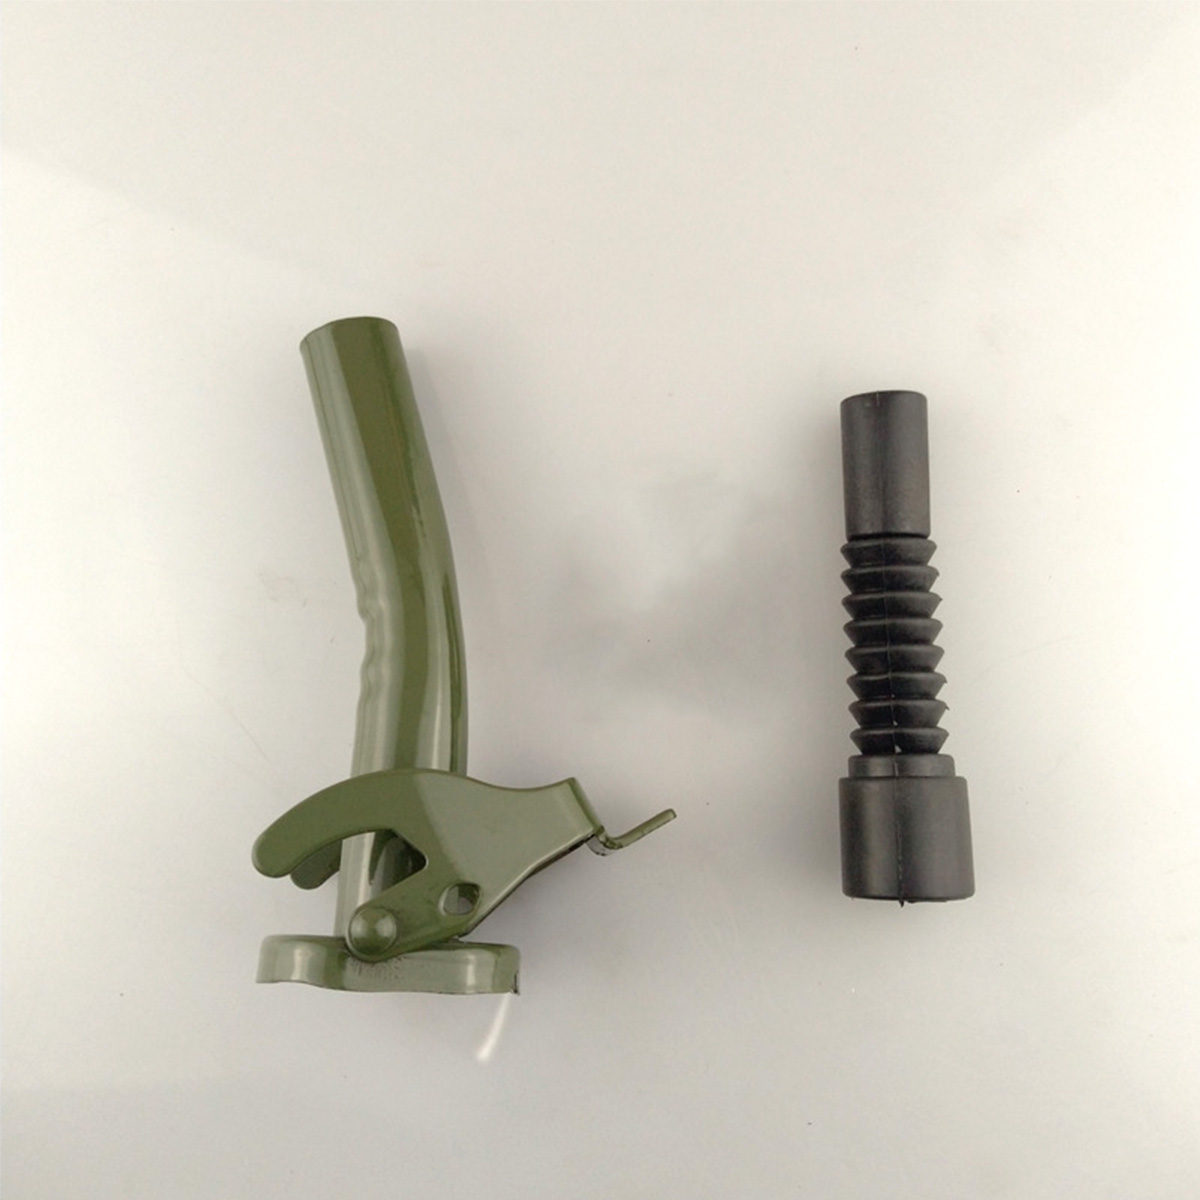 Black-Metal-Jerry-Can-Gas-Canister-Rubber-Nozzle-Spout-Military-Style-Clamp-20L-1600813-9